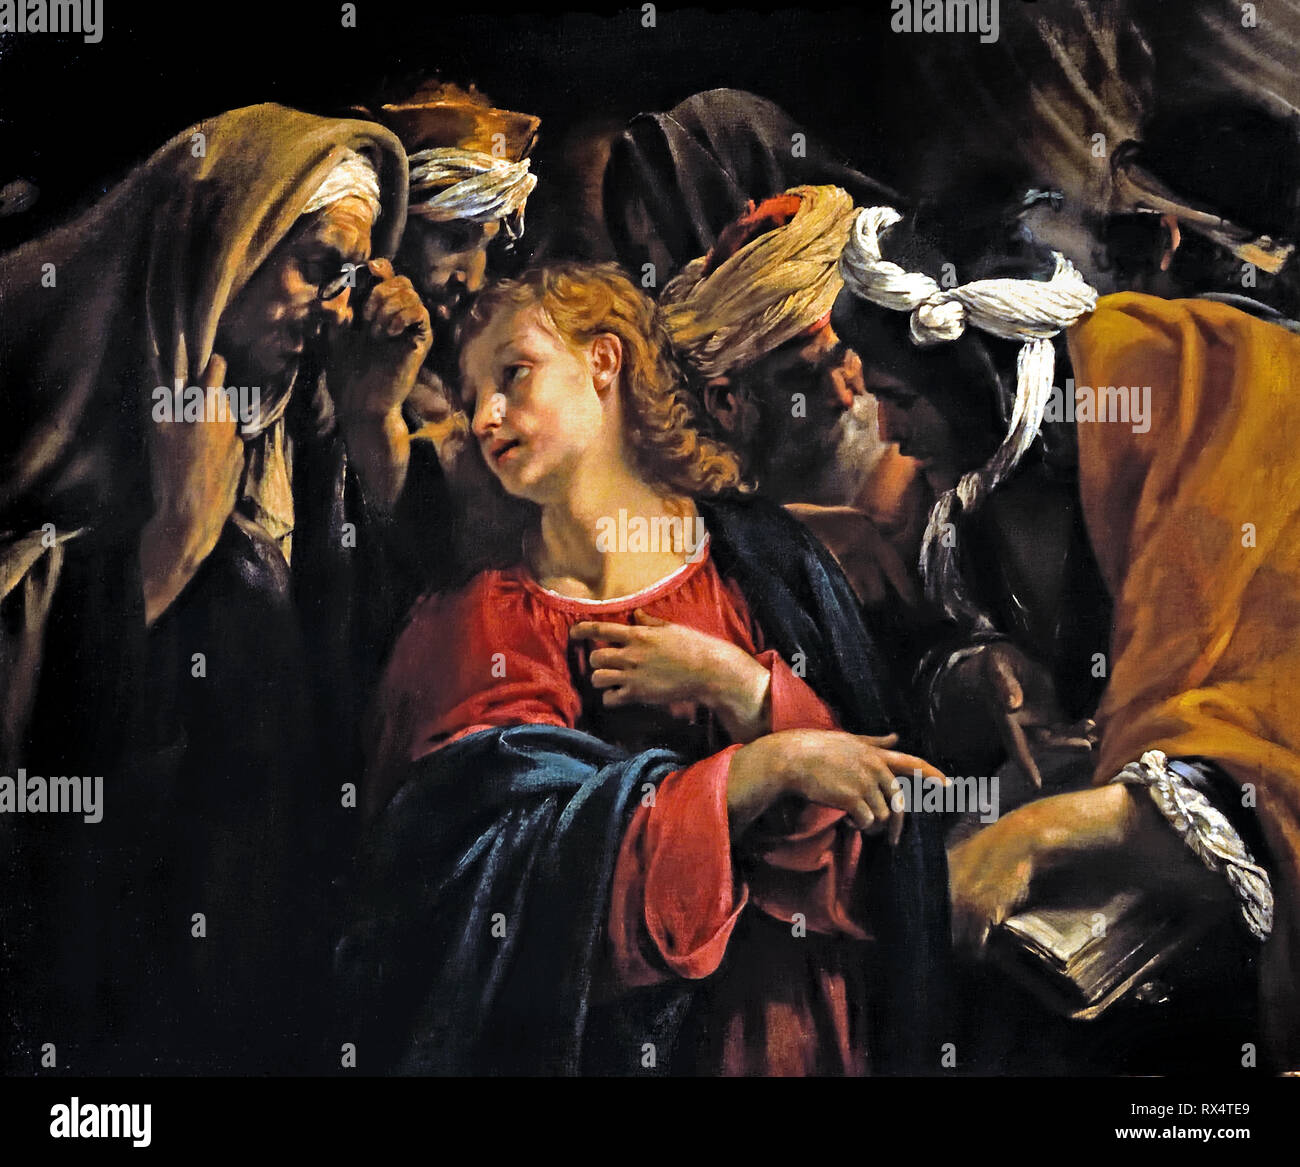 Christ amongst the Doctors - Scribes,1609 painting by Orazio Borgianni  1574 – 1616 ( Caravaggists, Style of Caravaggio) Italy, Italian. Stock Photo